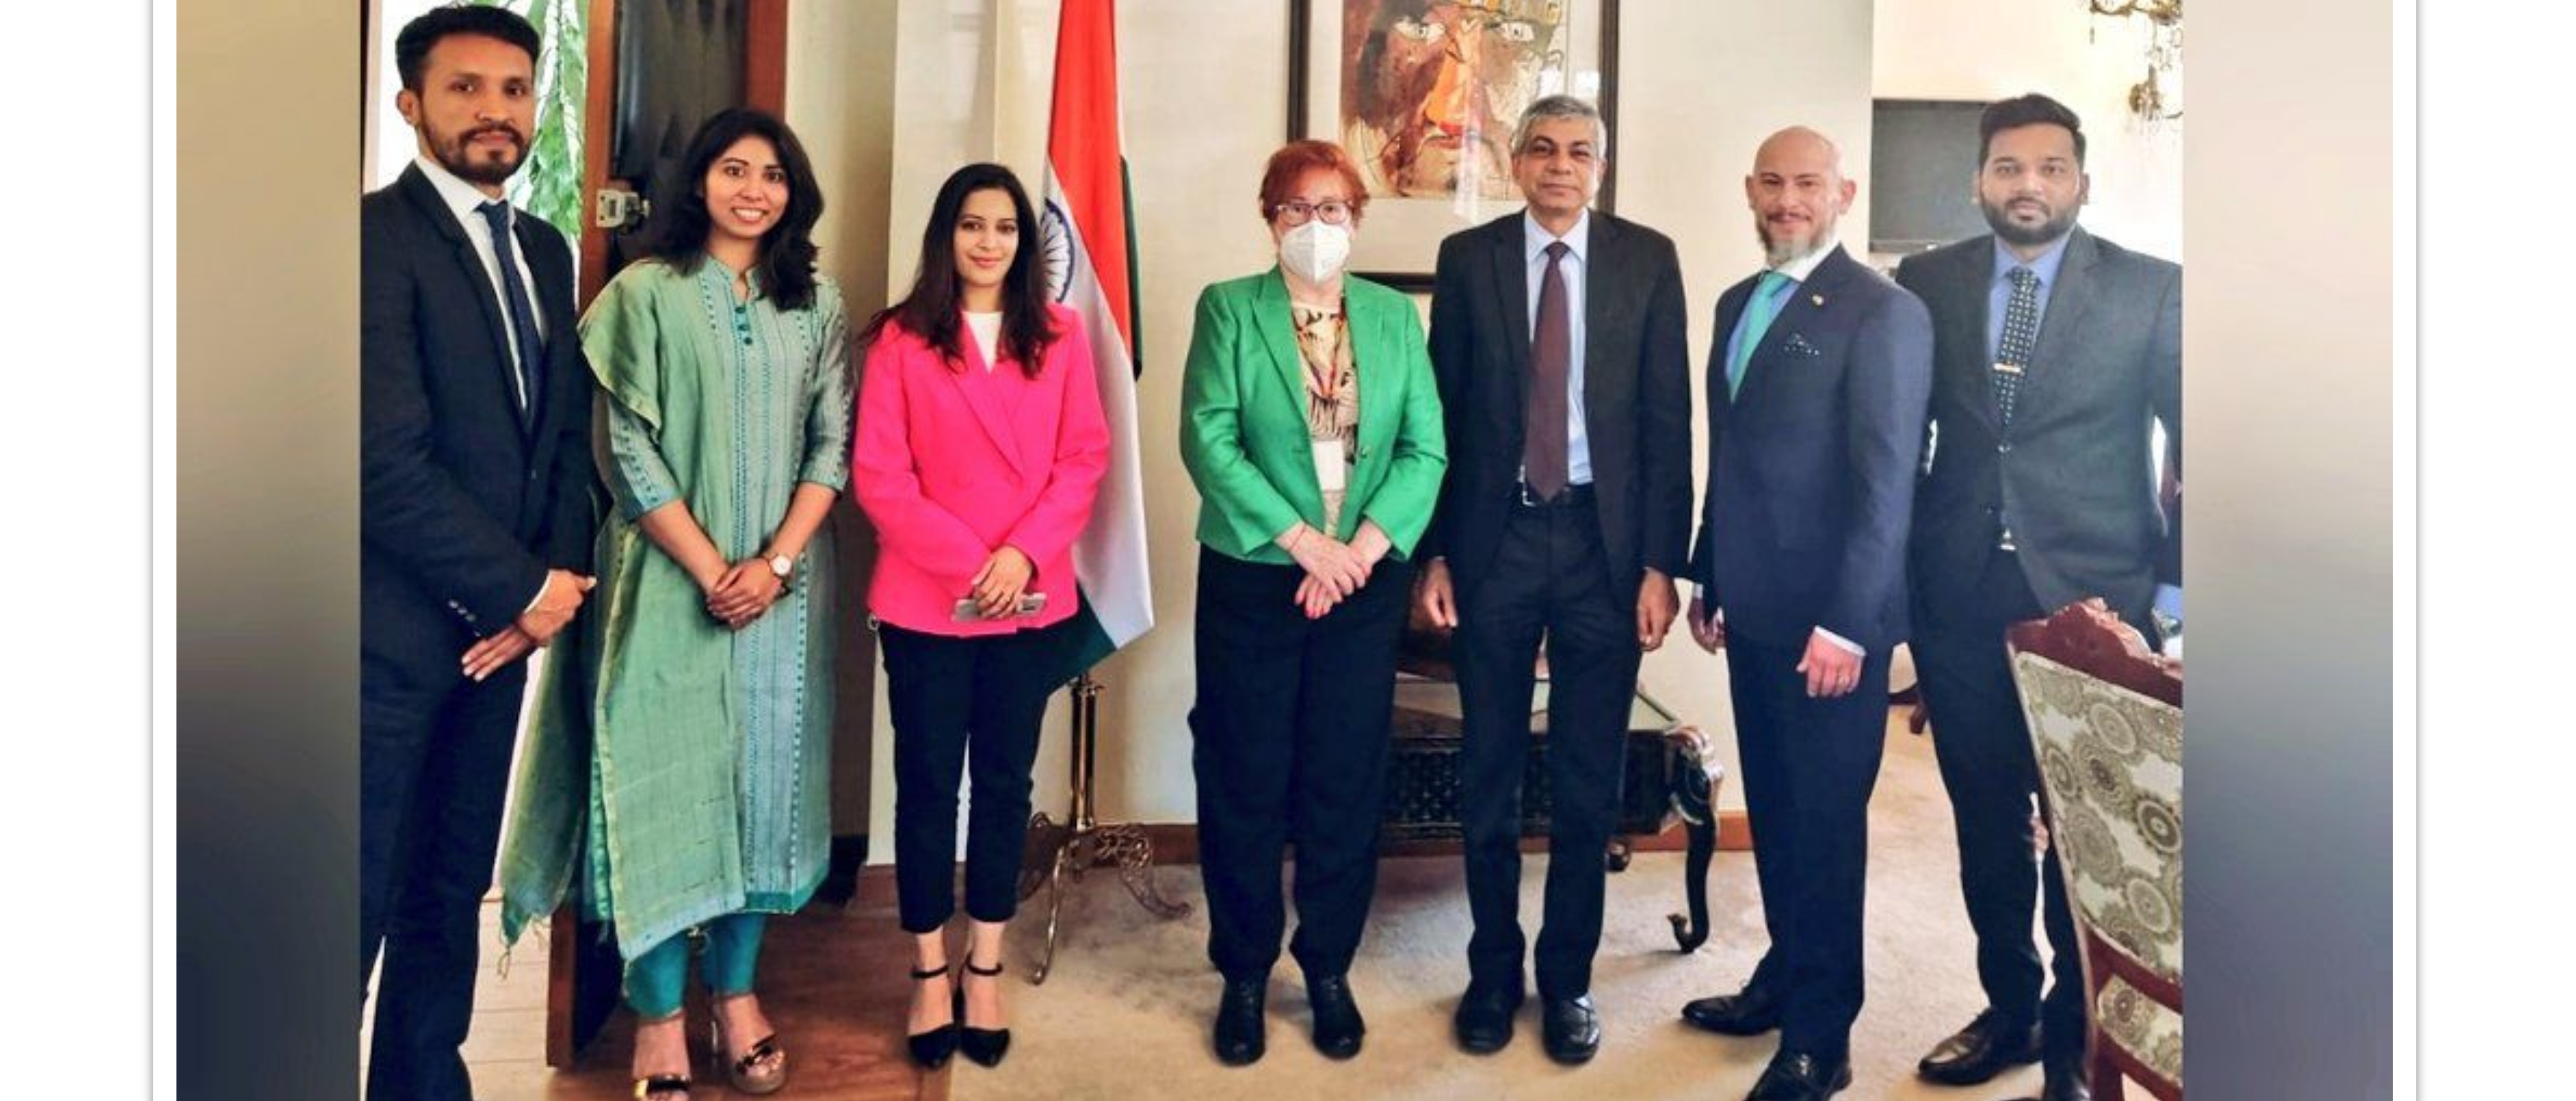  Embassy officers led by Ambassador Pankaj Sharma, met with the delegation from the Mexican Space Agency, led by Prof. Rosa Ramirez & comprising Mr. Julio Castillo & Mr.Jesús Romero. They discussed about further collaboration between ISRO and Mexican Space Agency (AEM)